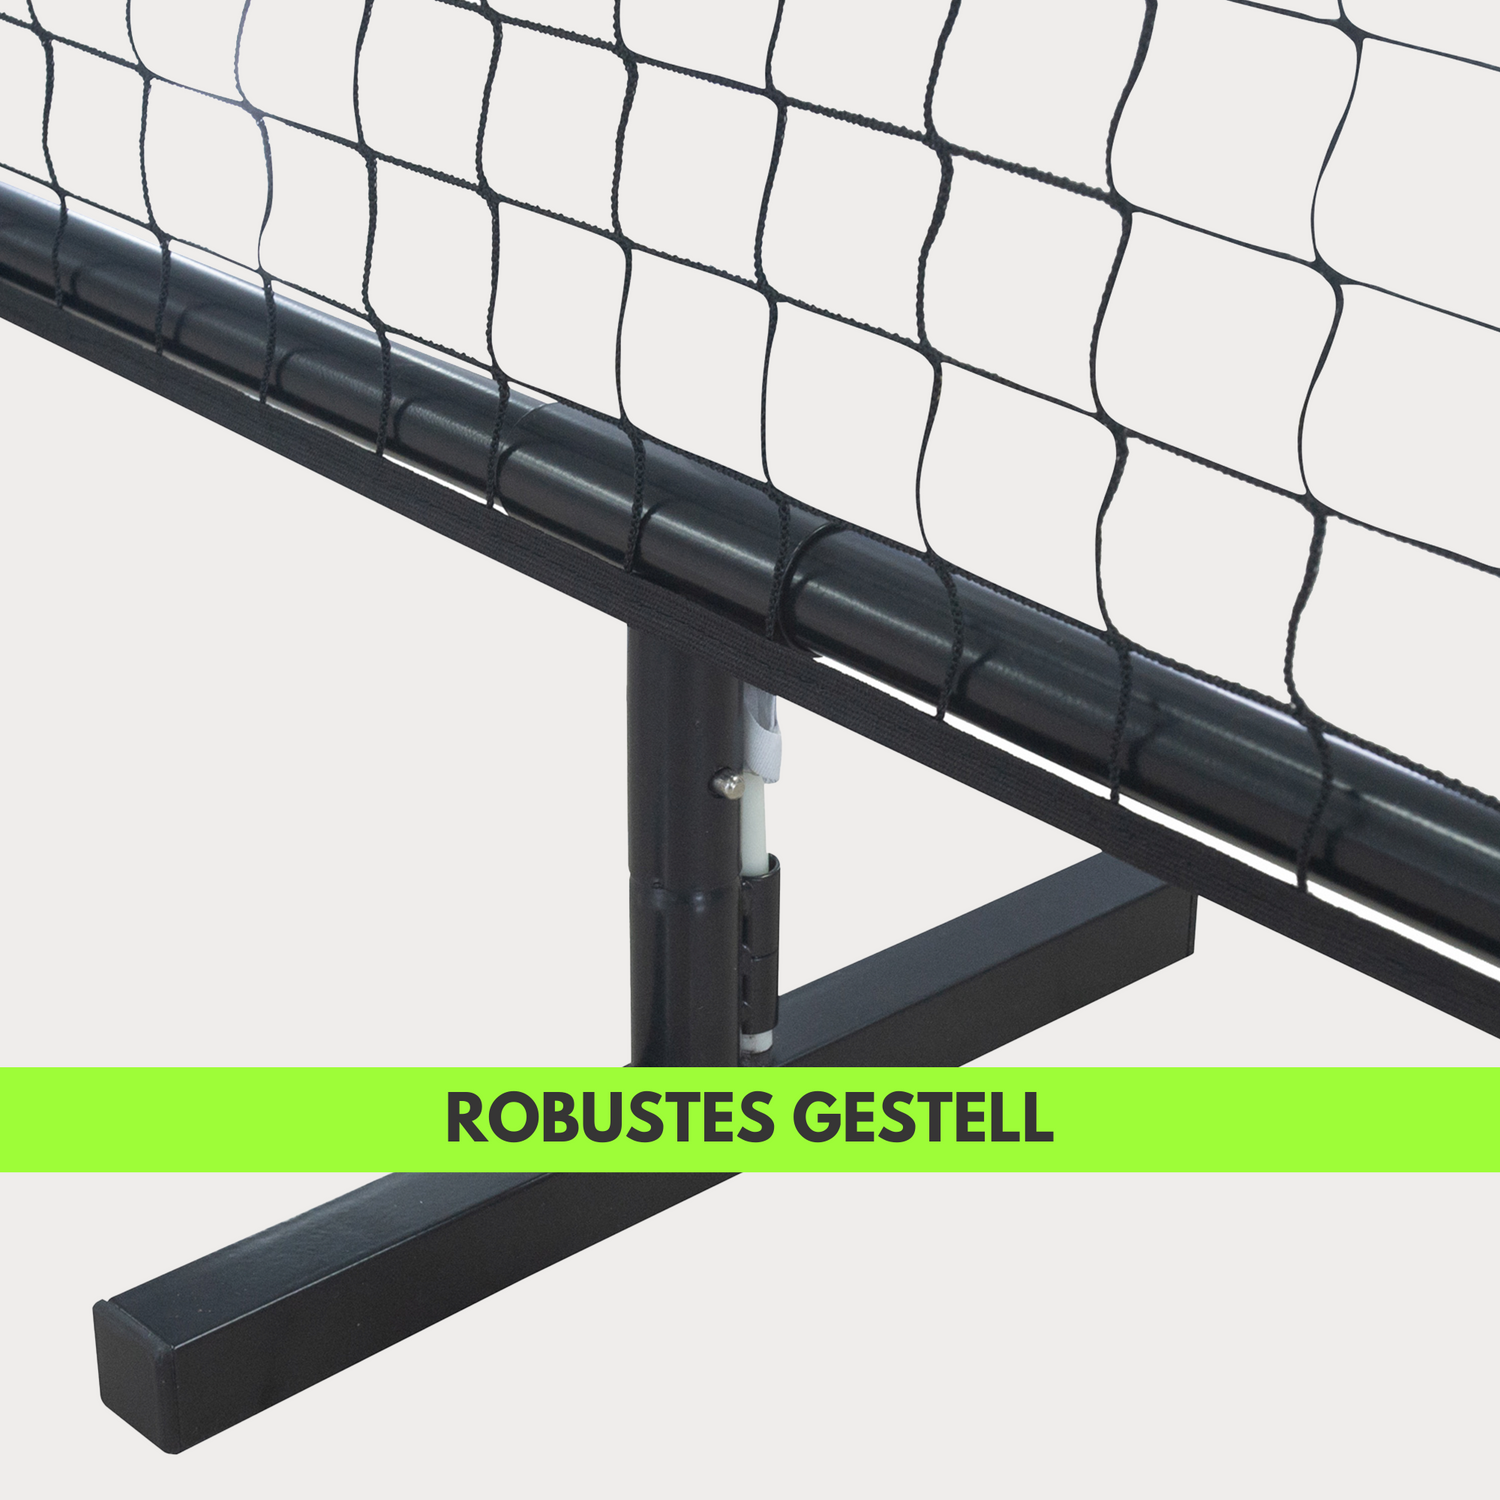 Robustes Gestell